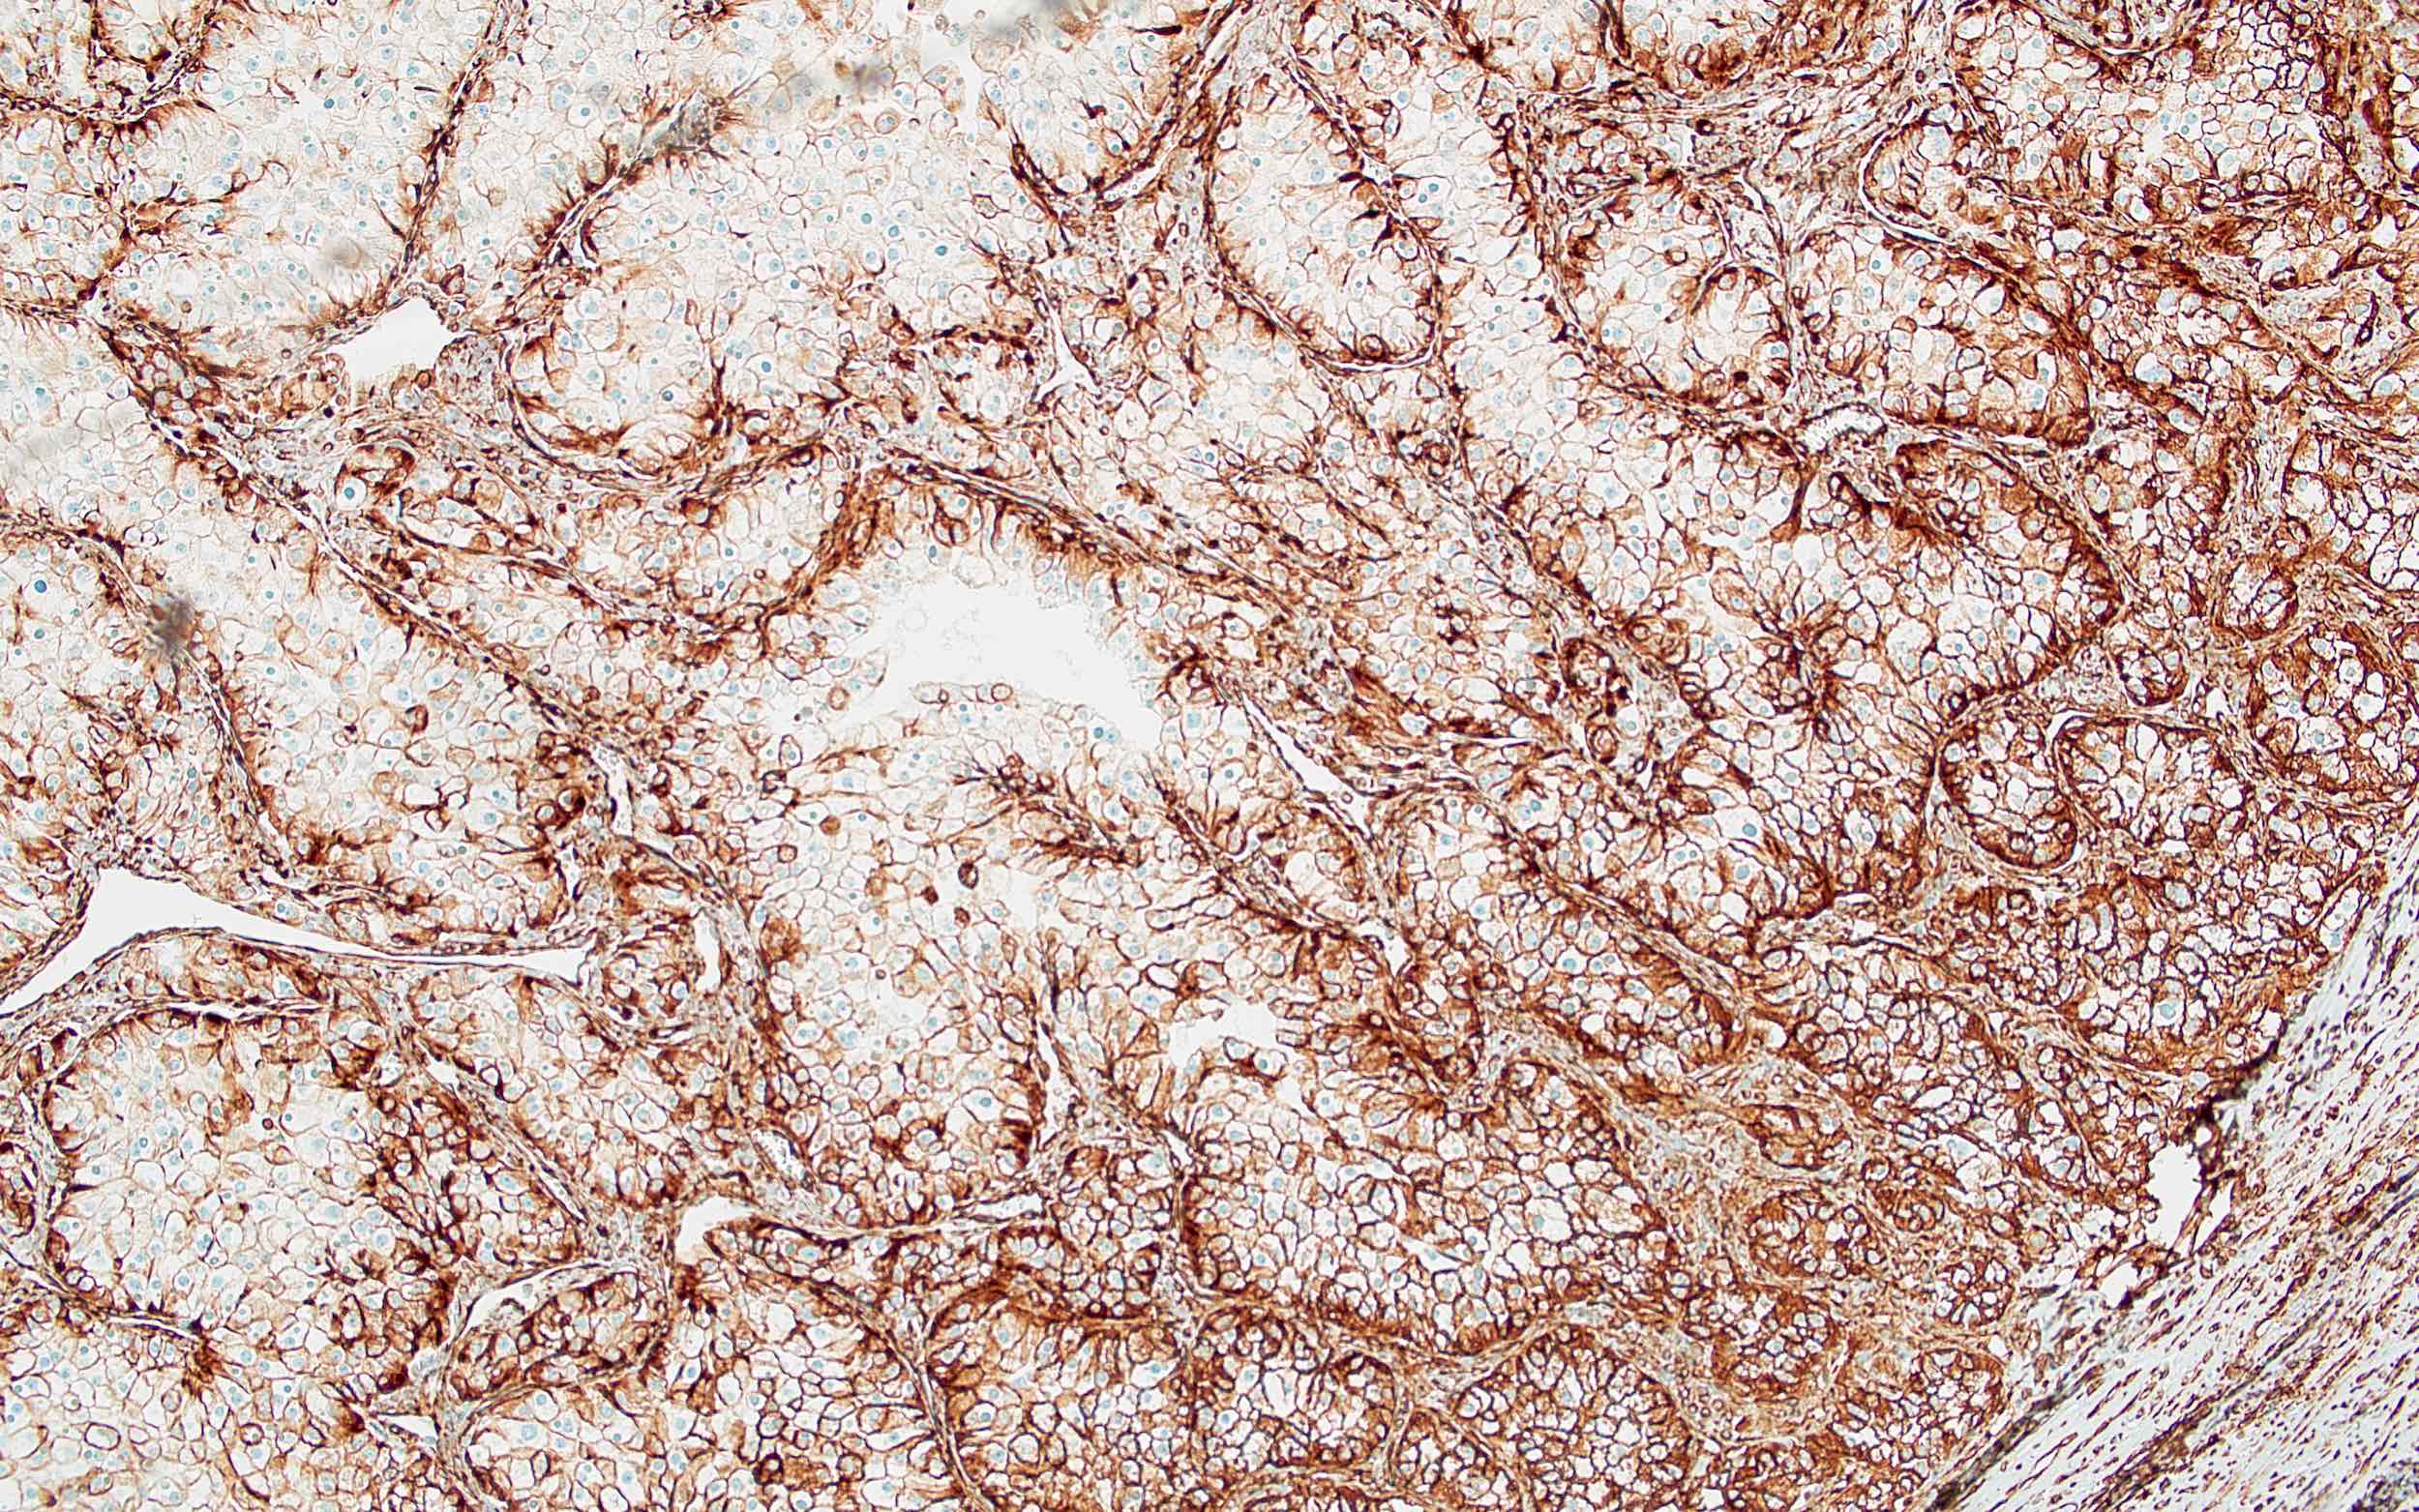 Atypical cells of CCRCC, vimentin+